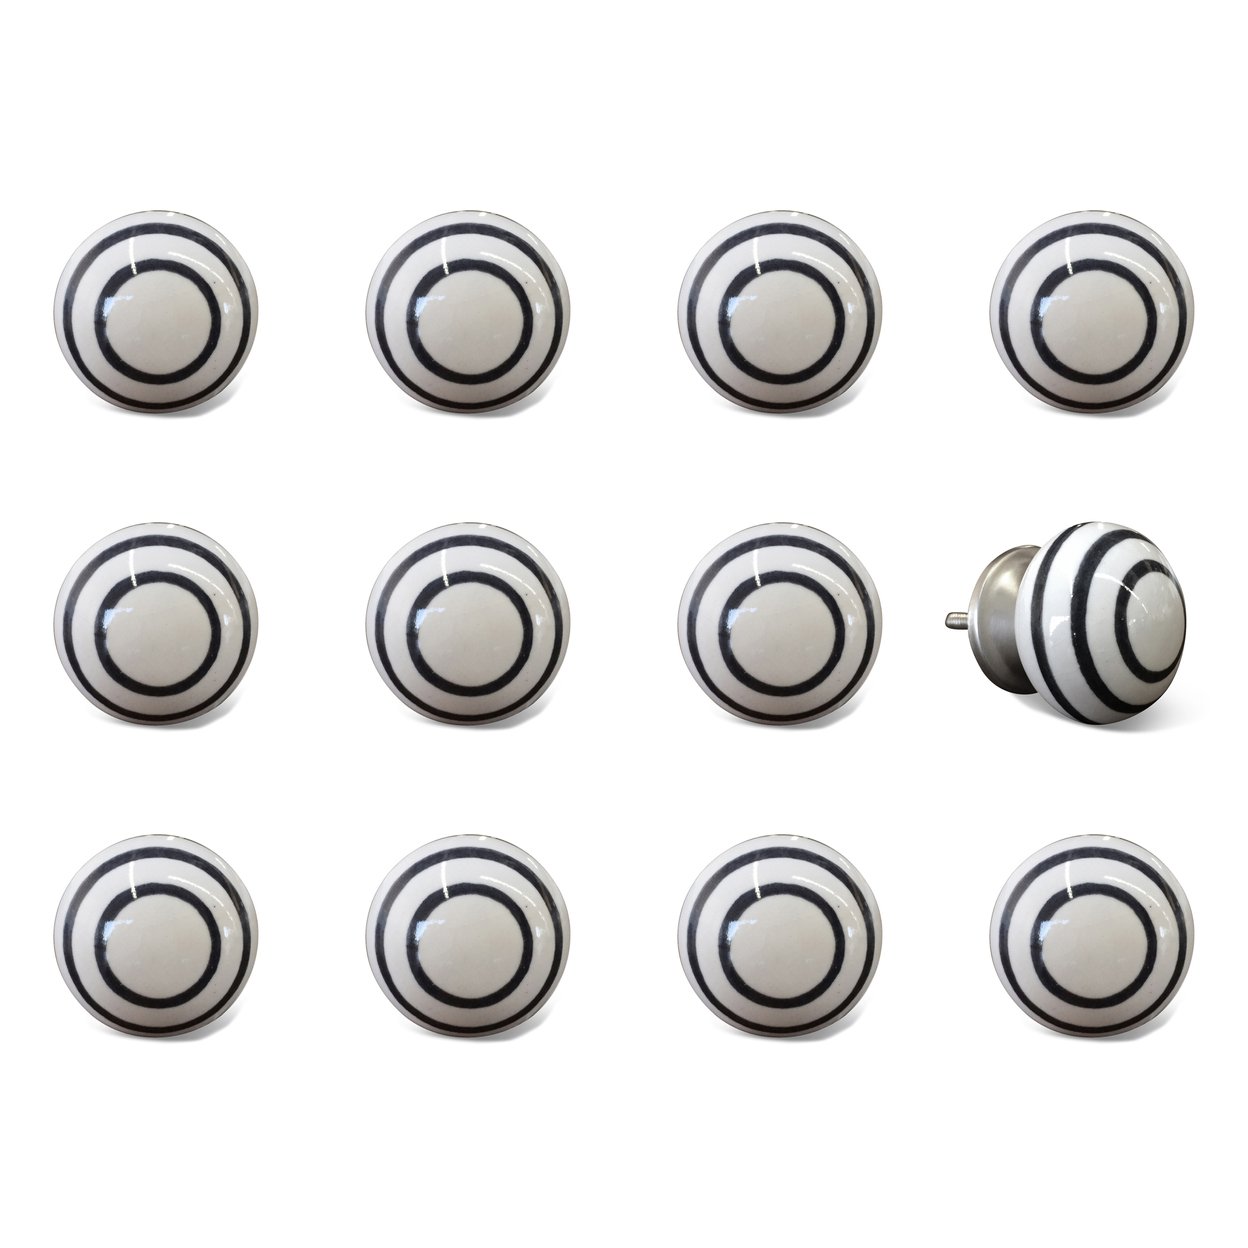 Knob-It    Classic Cabinet and Drawer Knobs  12-Piece  16